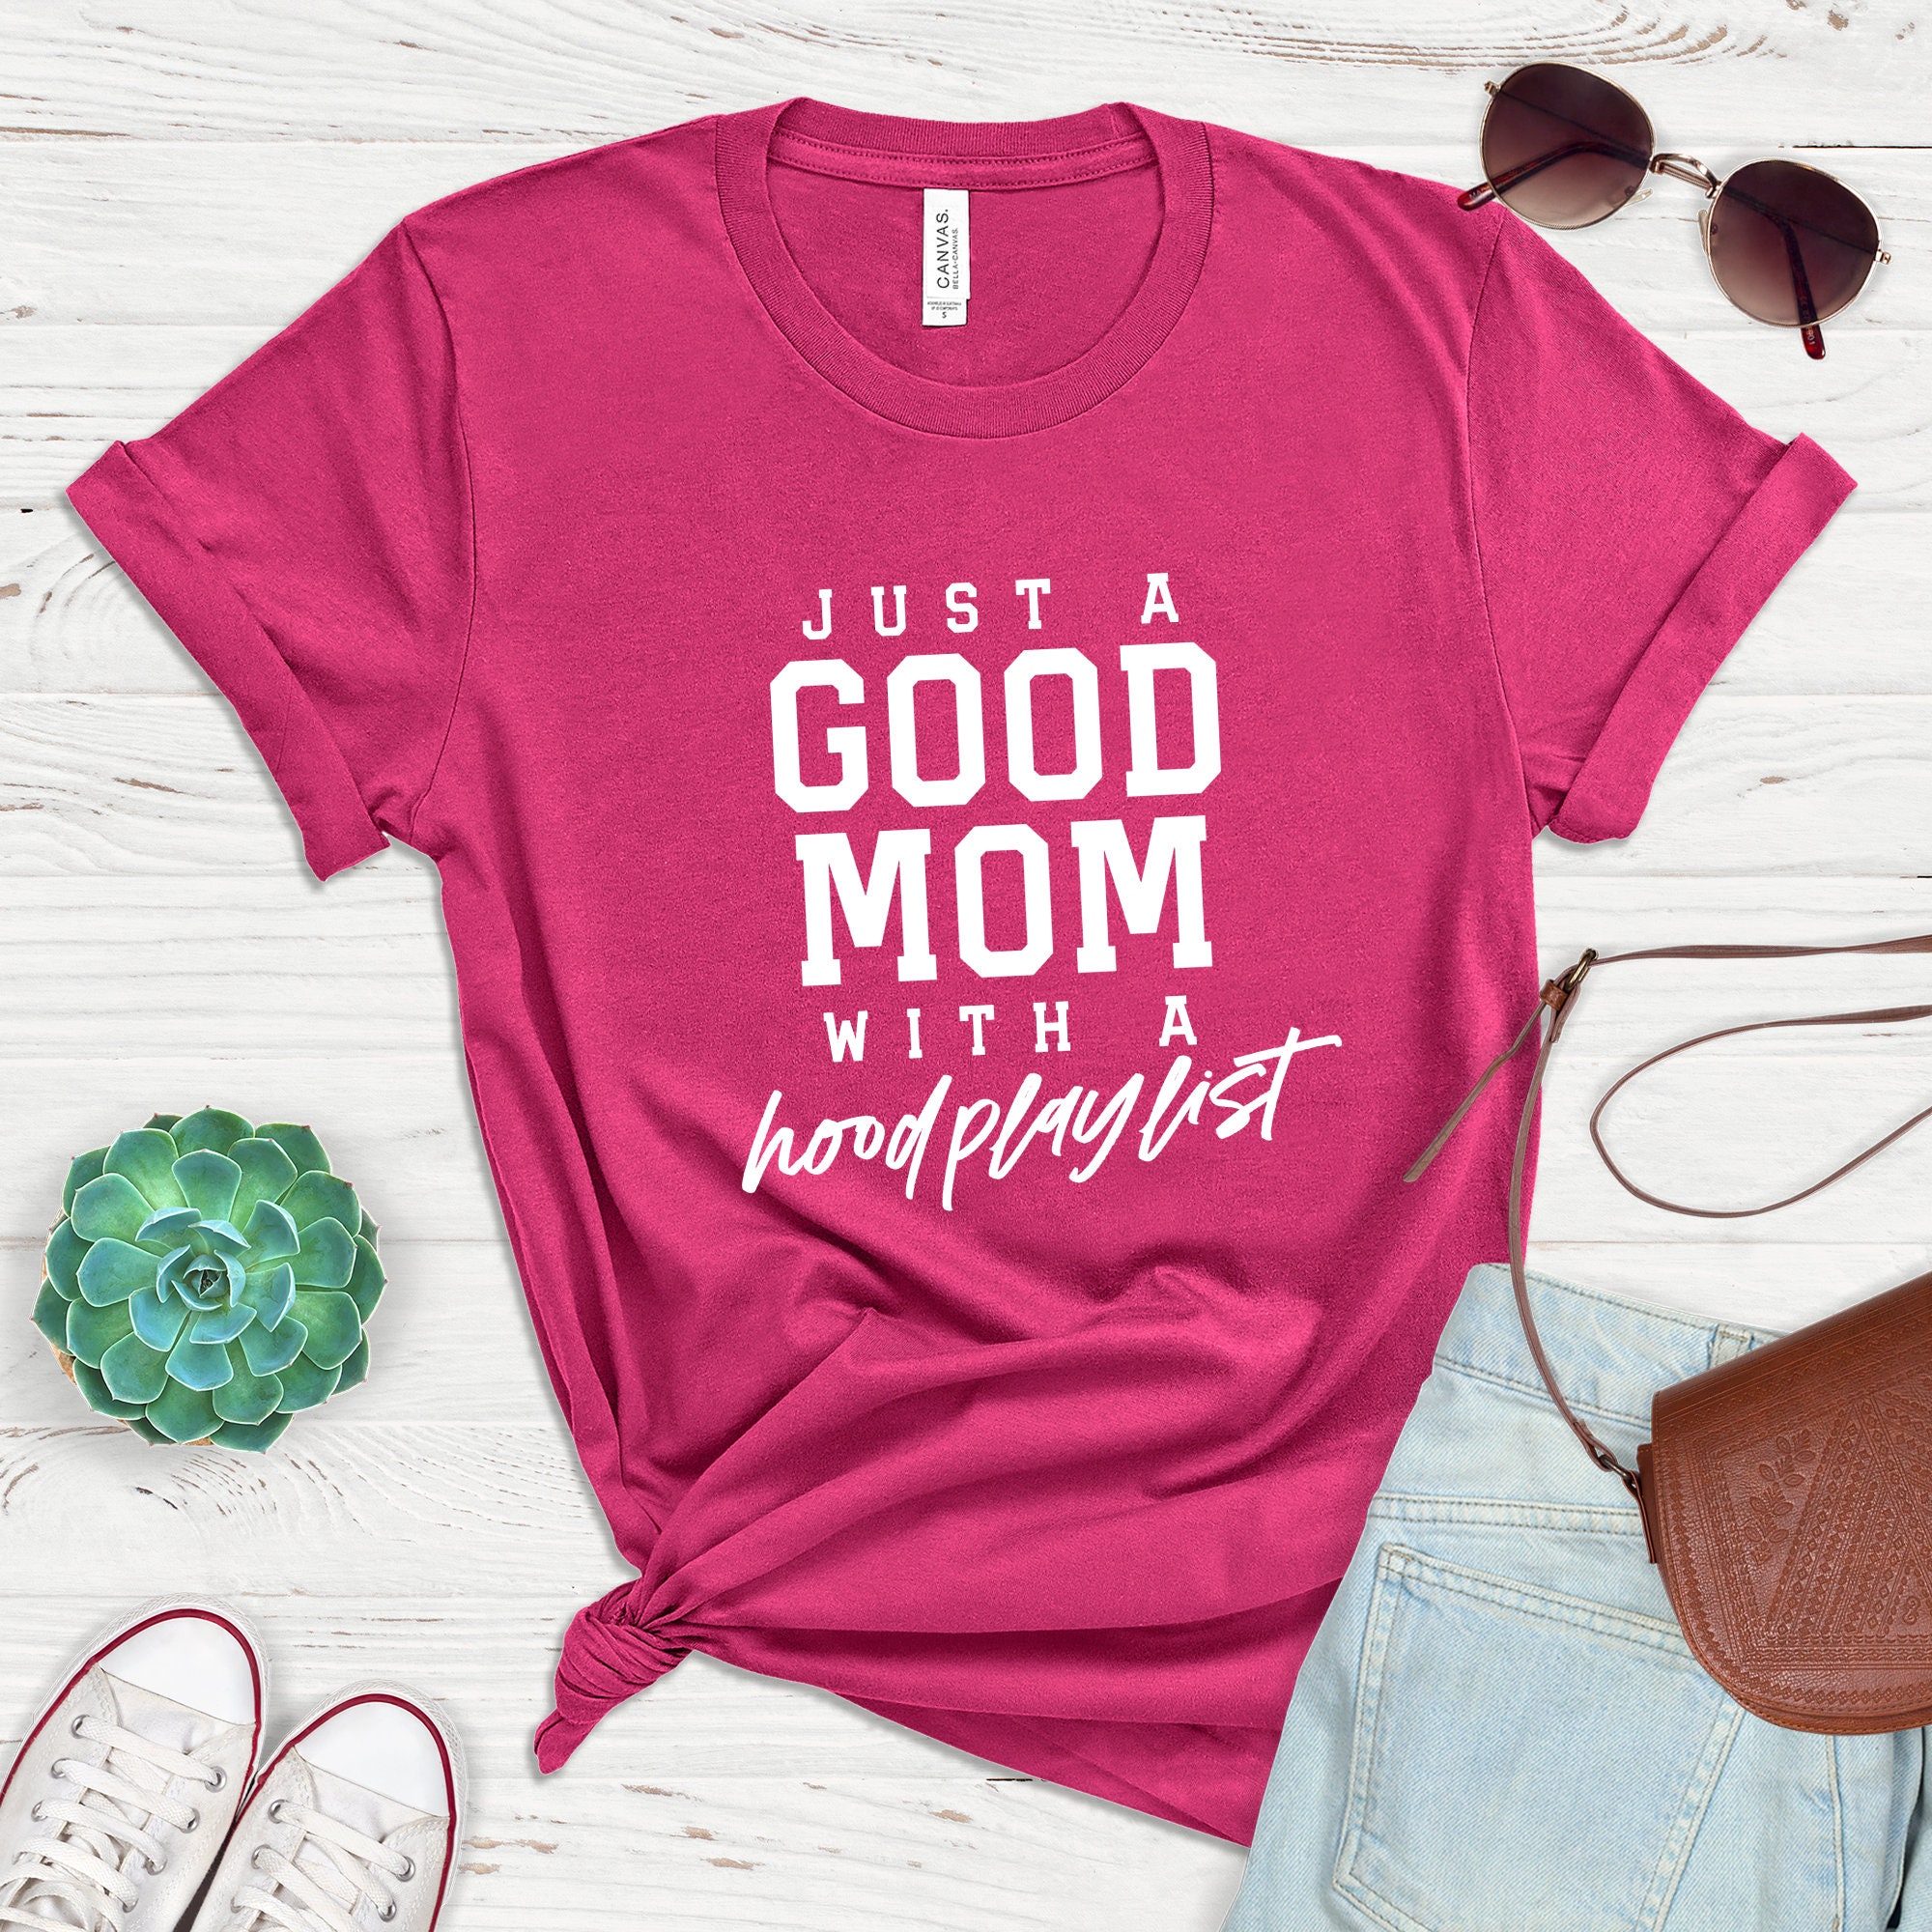 Tshirts mom Gifts for mom from daughter Funny mom shirt Funny Mom Tee funny mom gift Mama tee Just a good mom with a hood playlist